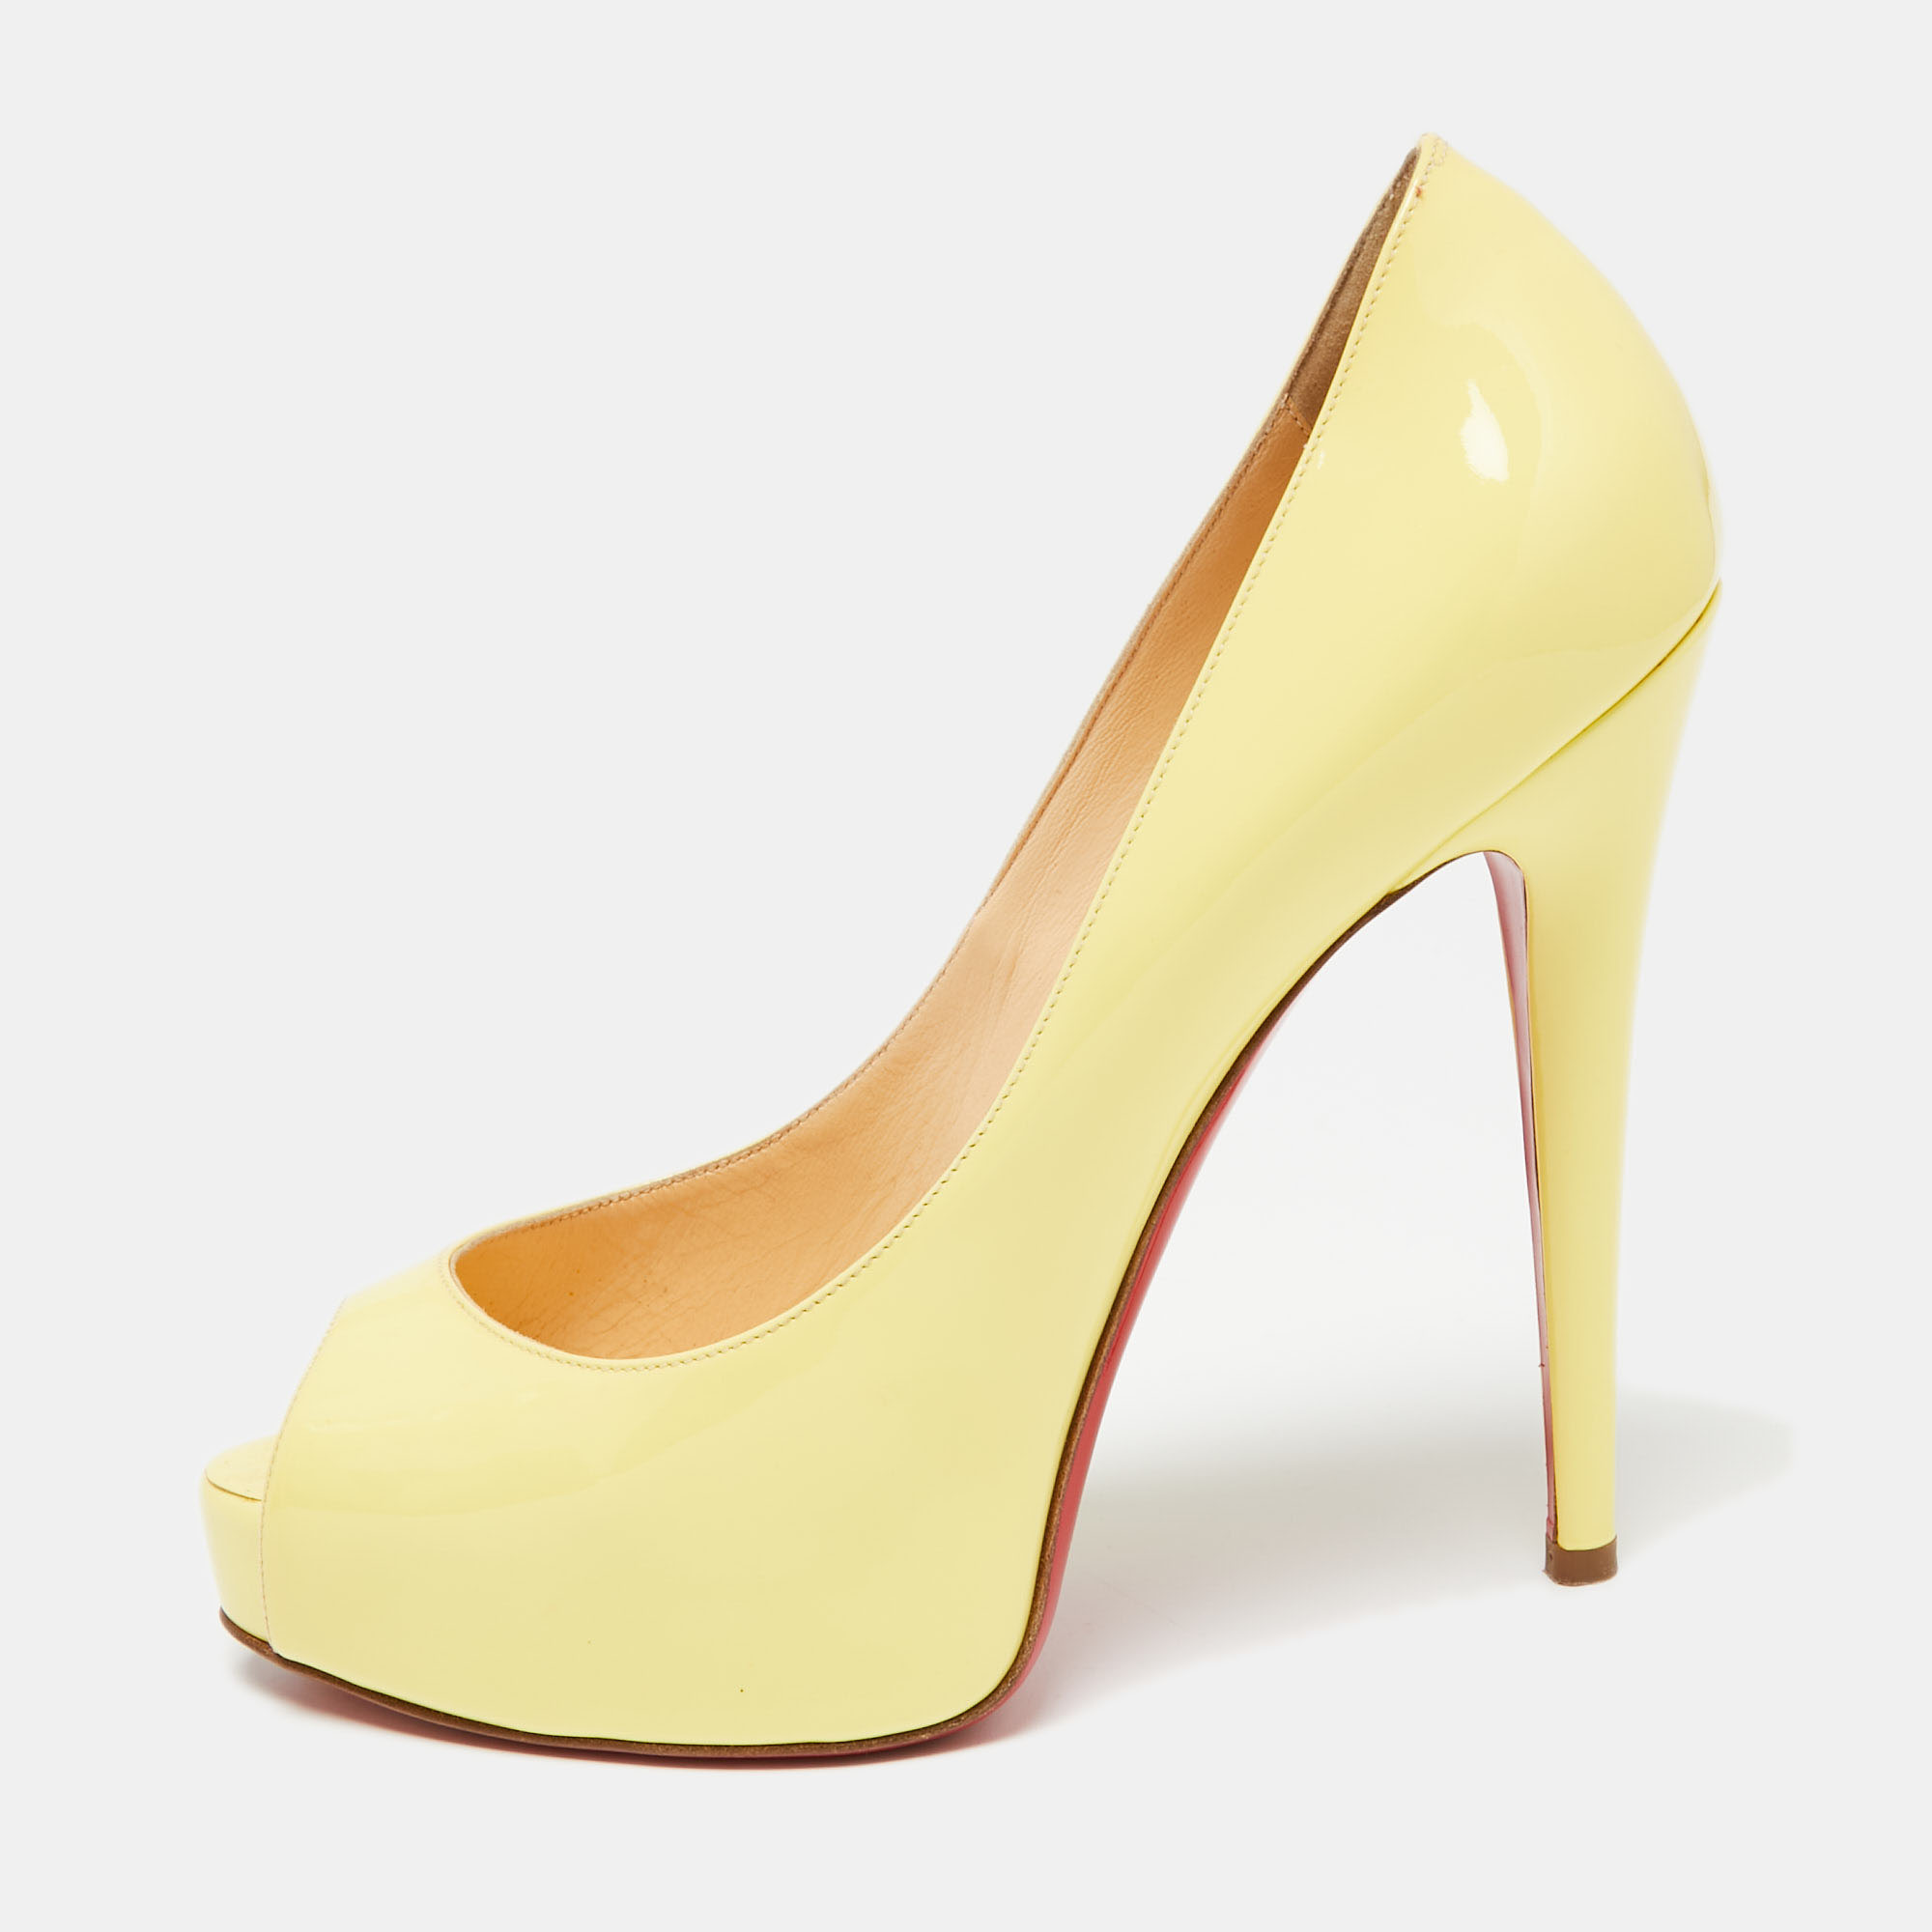 This pair of Christian Louboutin pumps is a timeless classic. Step out in style while flaunting these patent leather shoes ideal for all occasions. They feature peep toes platforms and 12.5 cm heels.